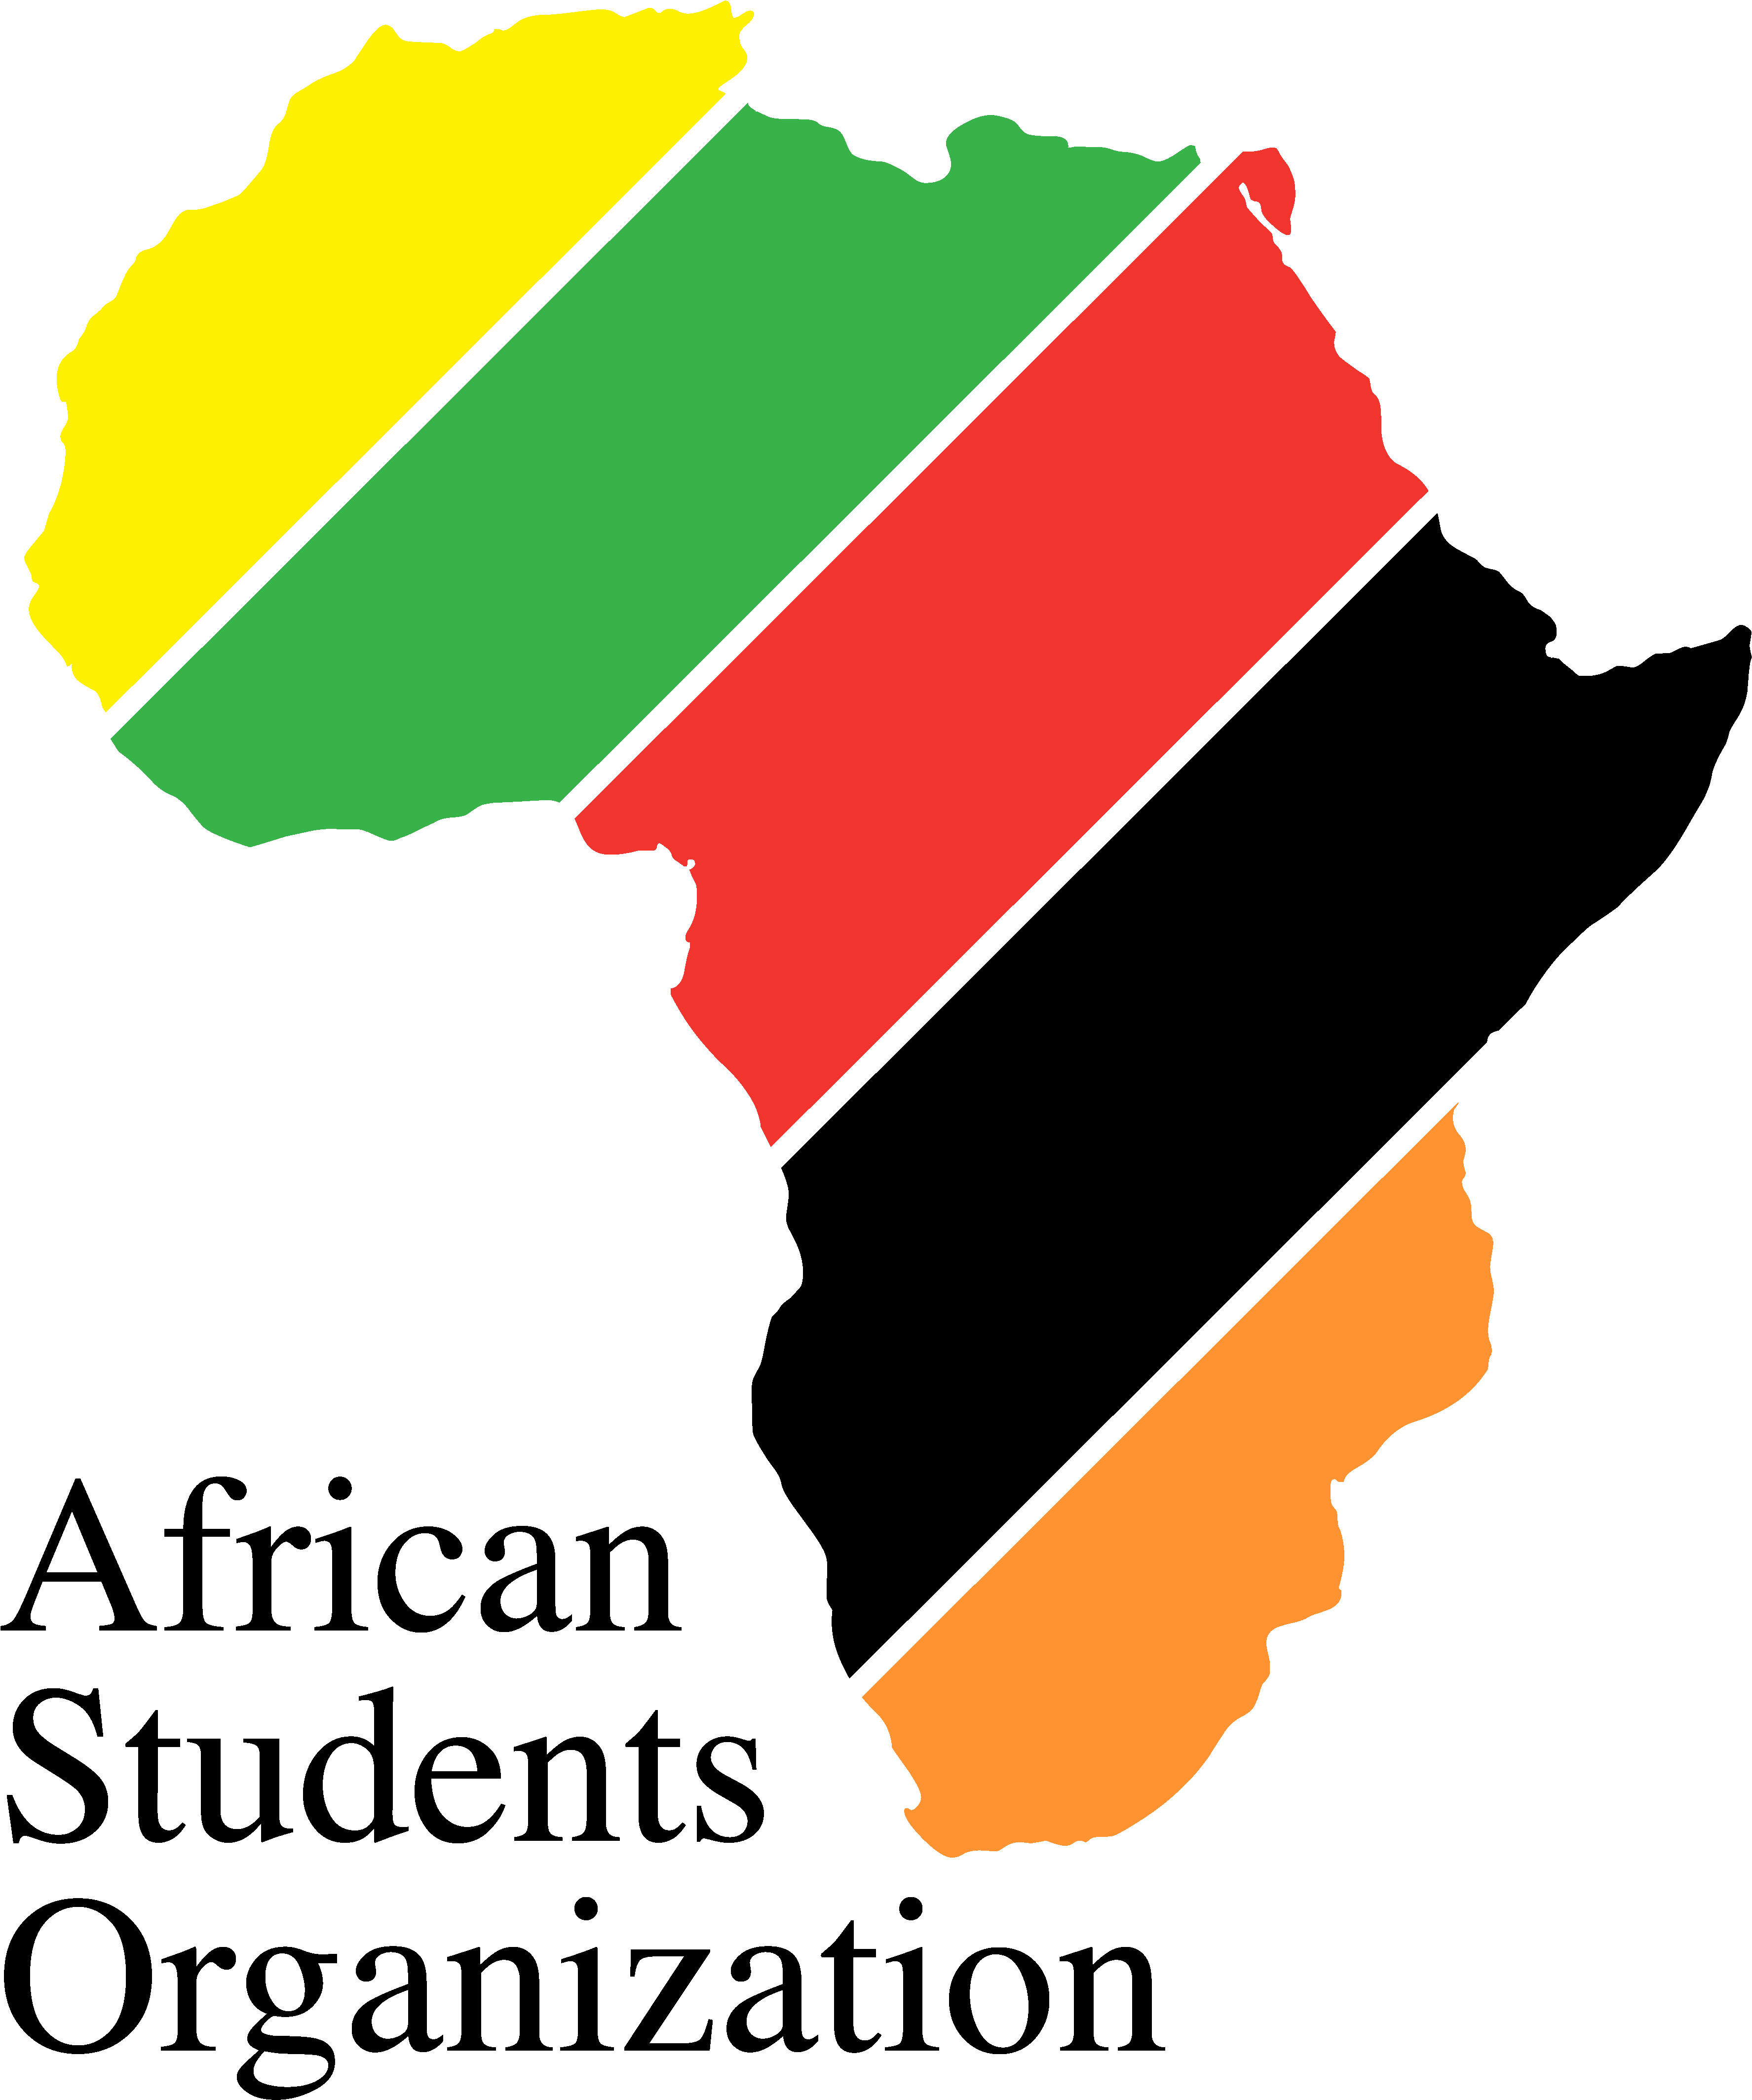 African Student Organization - Cultural Map Of Africa (5075x5075)